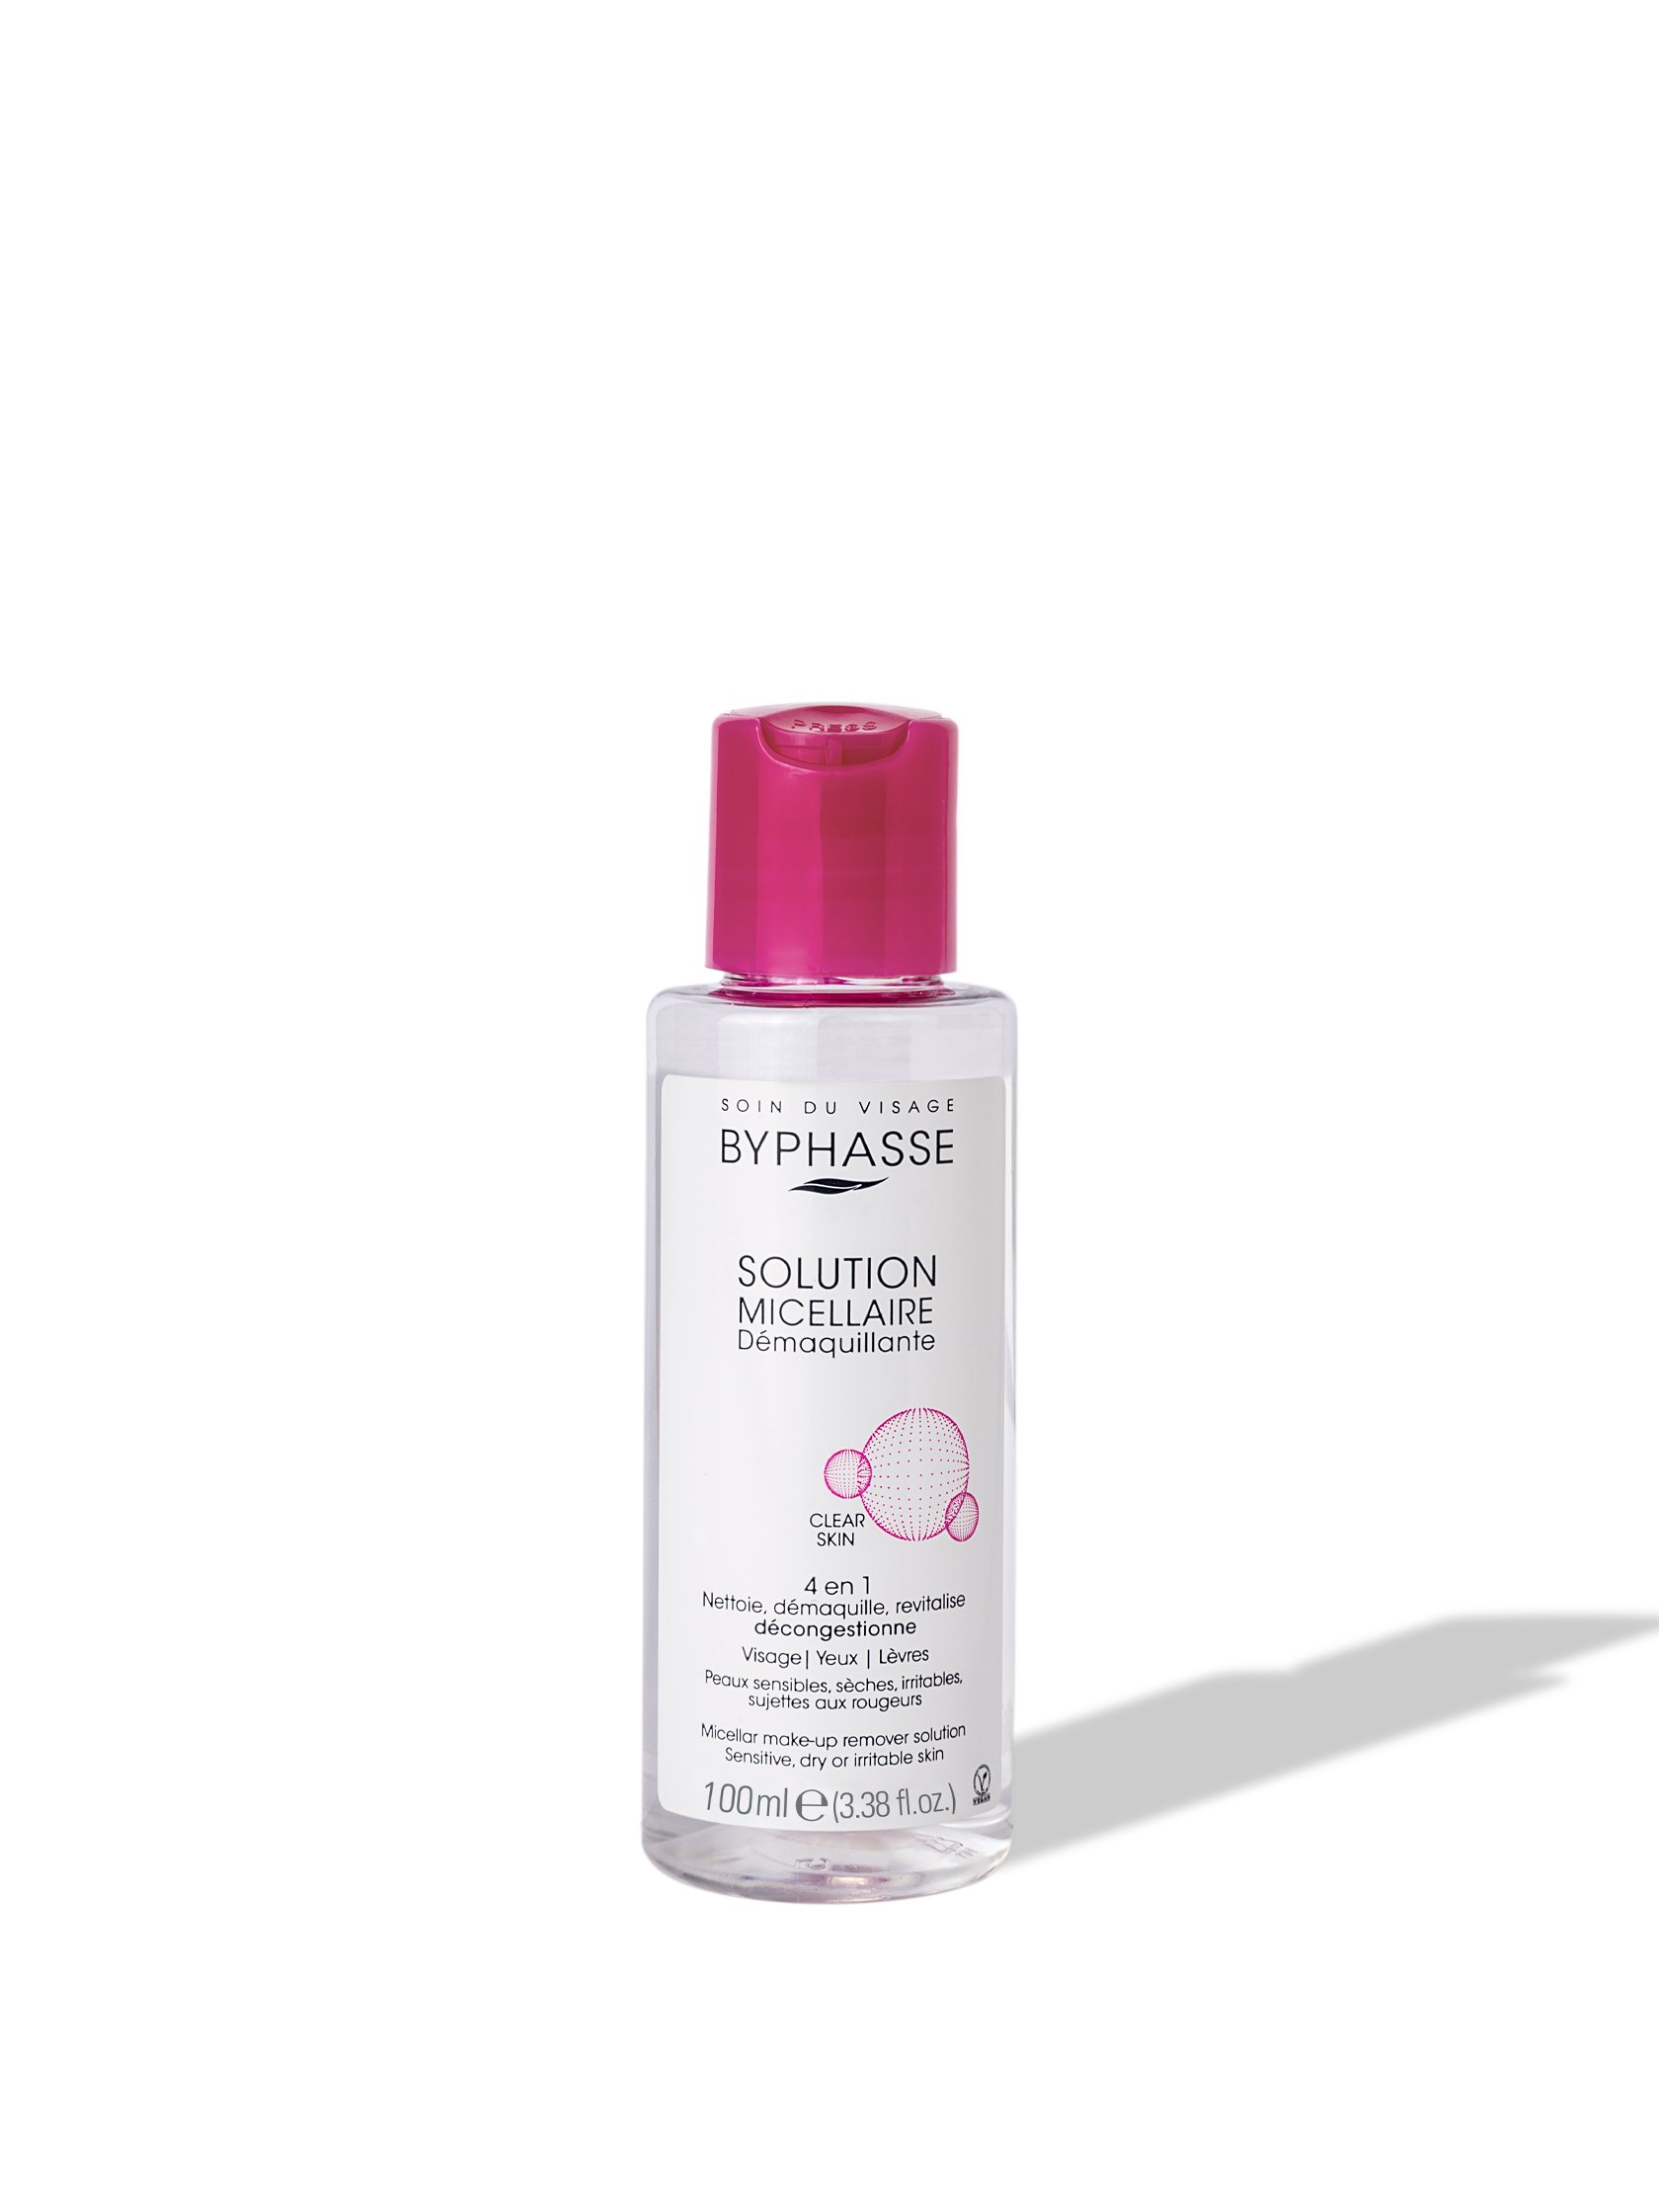 BYPHASSE MICELLAR MAKE-UP REMOVER SOLUTION SENSITIVE, DRY OR IRRITABLE SKIN - 100ML